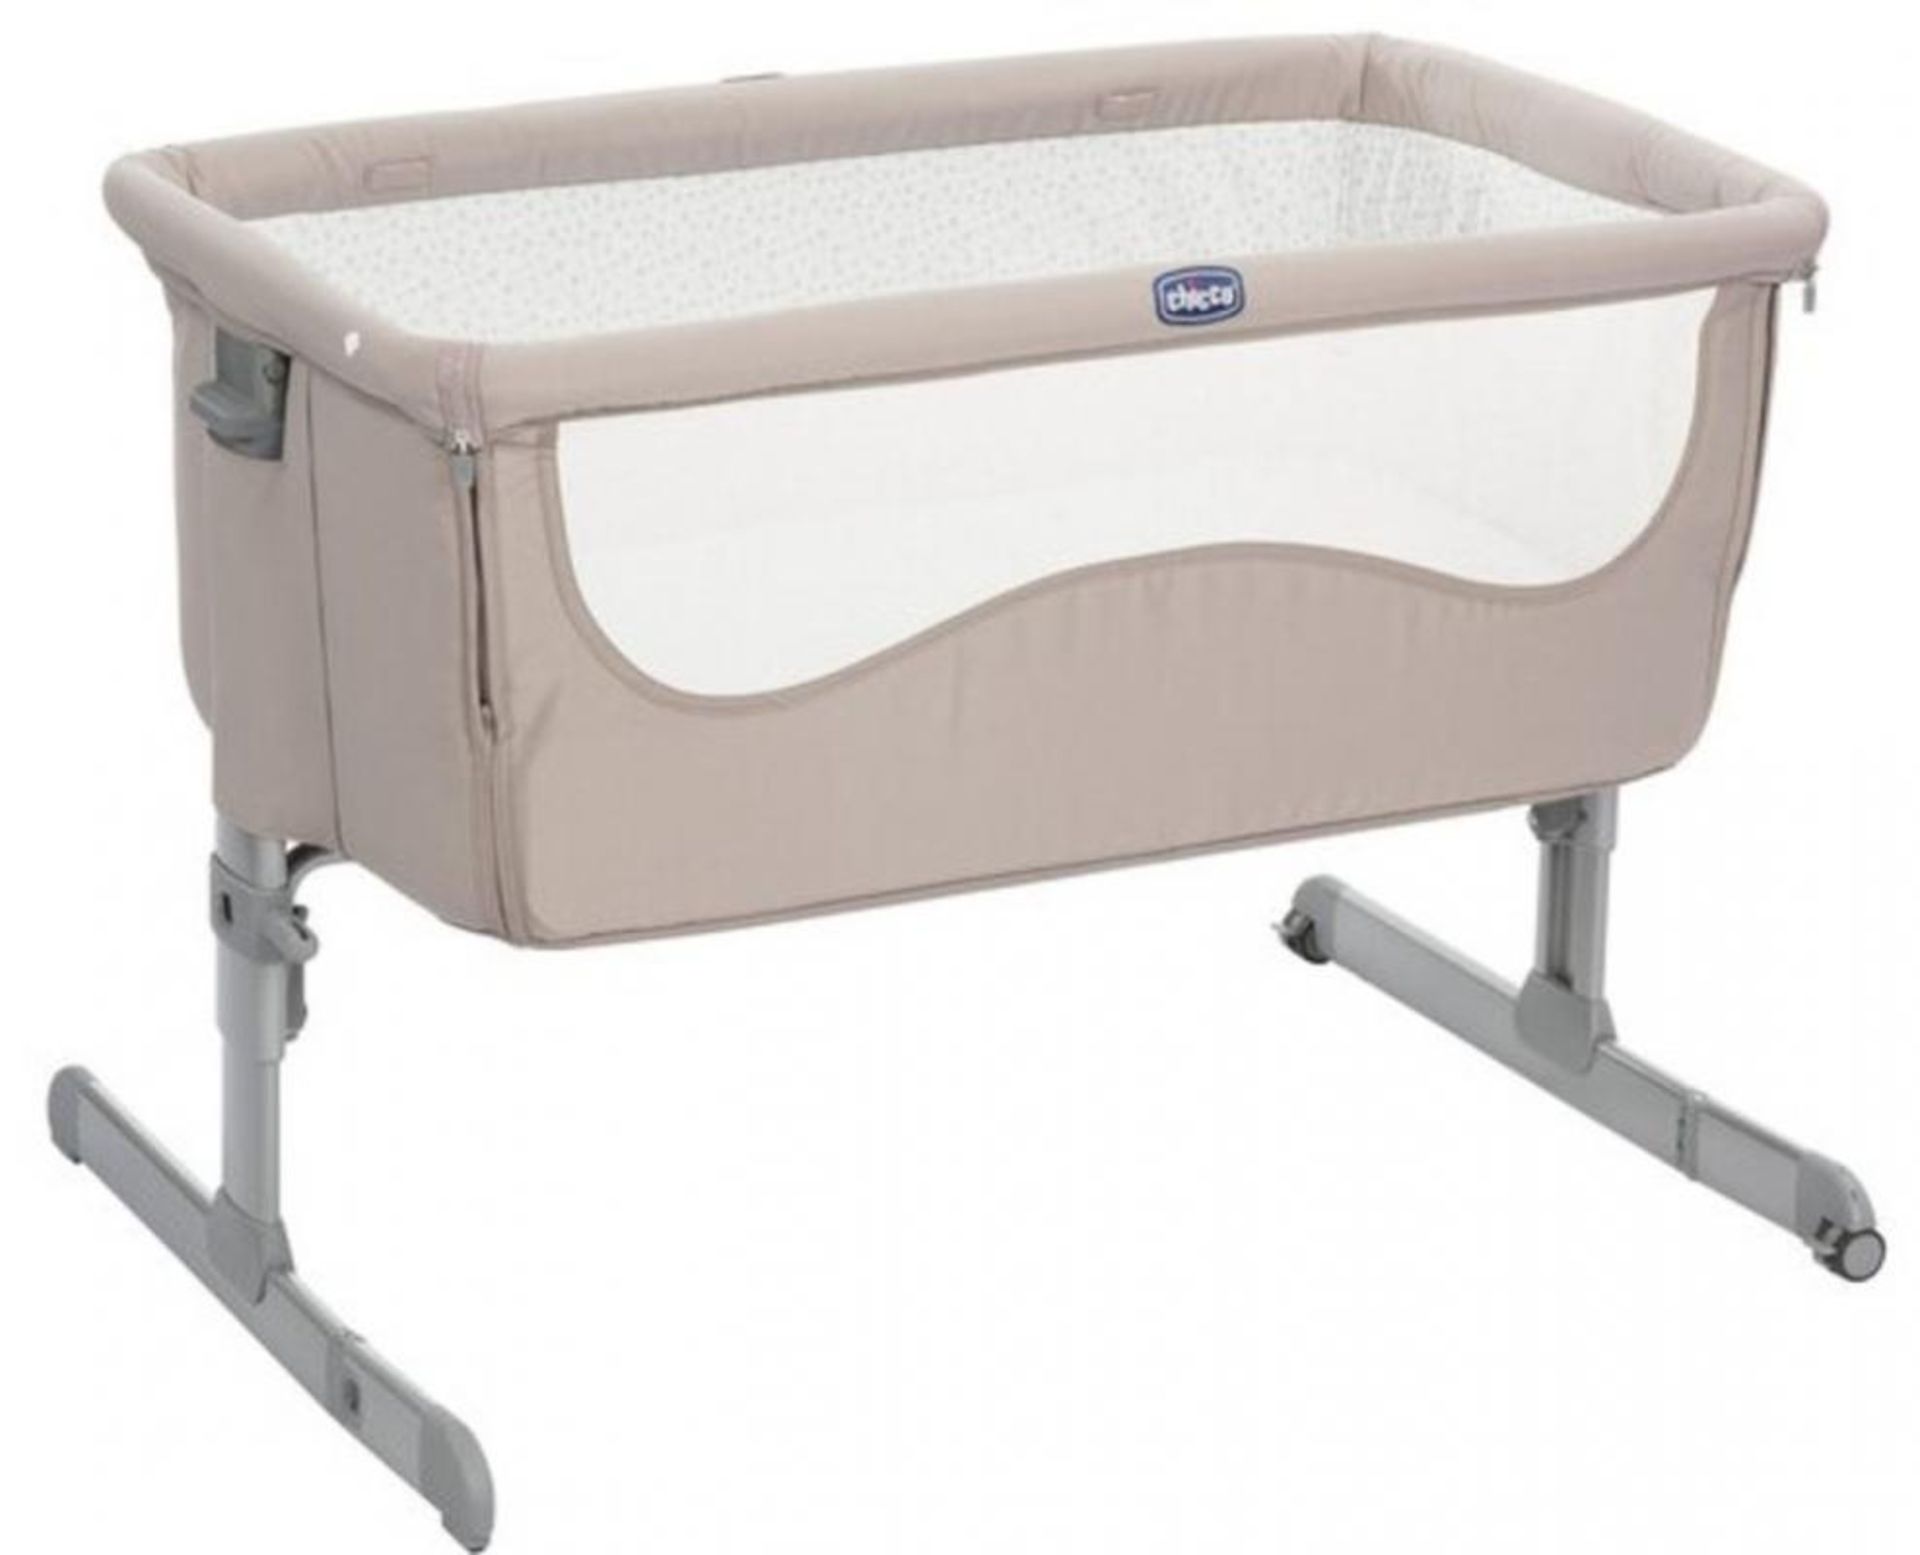 1 x Chicco Next2me Chick to Chick Bedside Baby Crib - Brand New 2019 Sealed Stock - Includes Mattres - Image 3 of 10